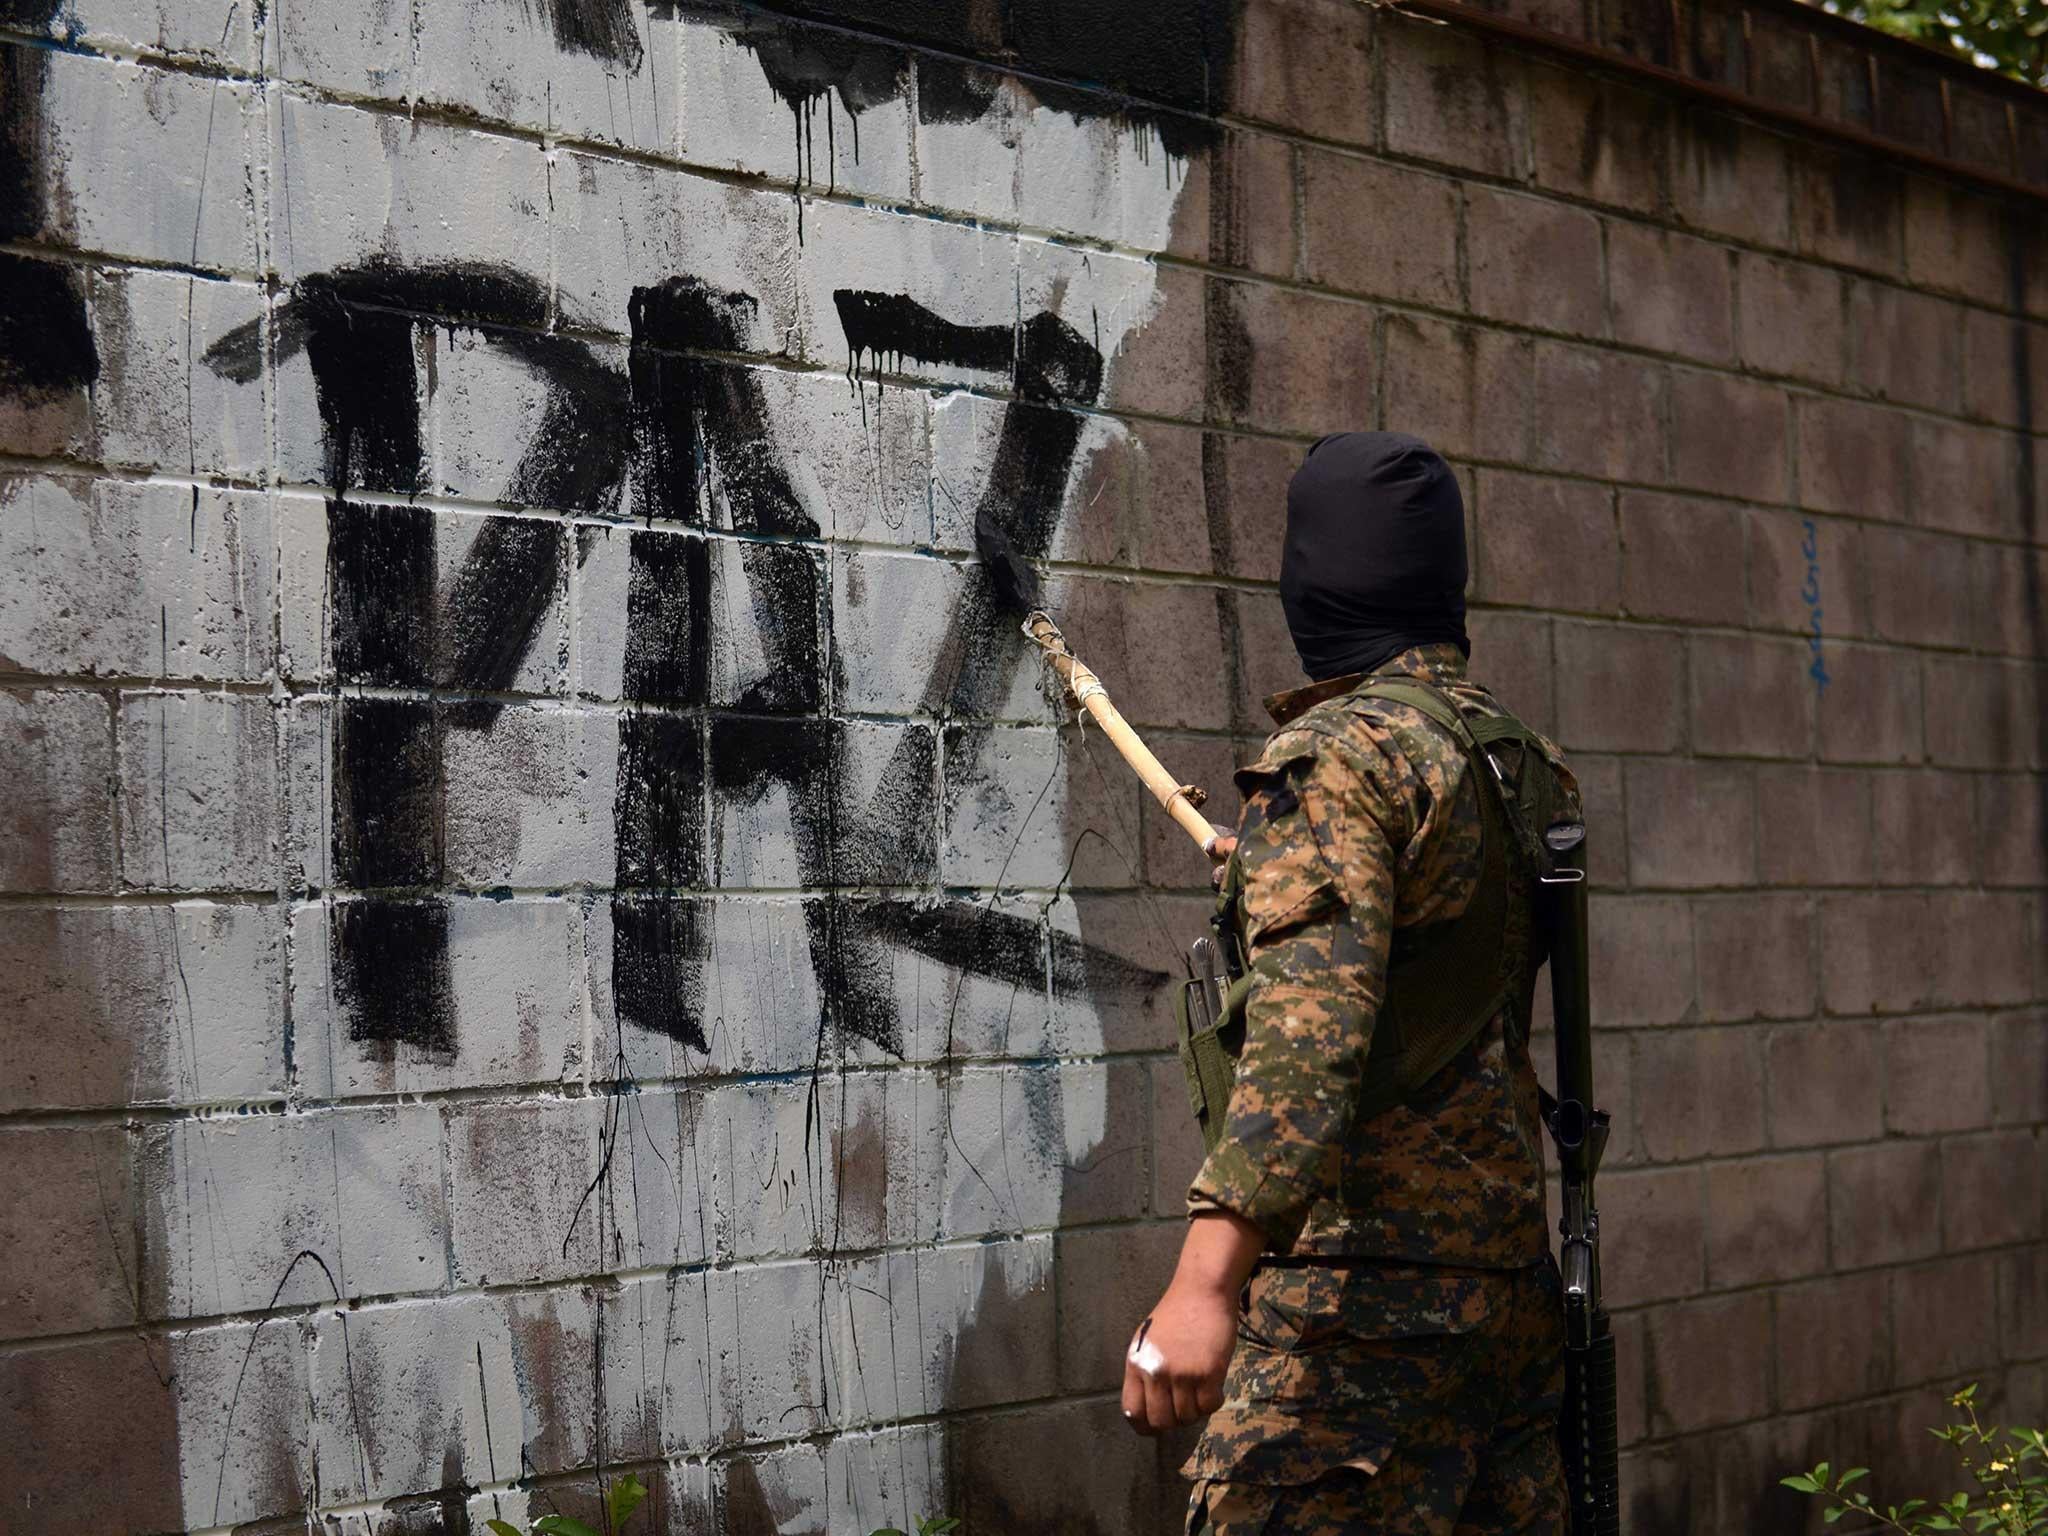 A soldier paints over graffiti associated with the Mara Salvatrucha gang in Quezaltepeque, a town 15 km from San Salvador, in an operation to take back gang-controlled neighborhoods